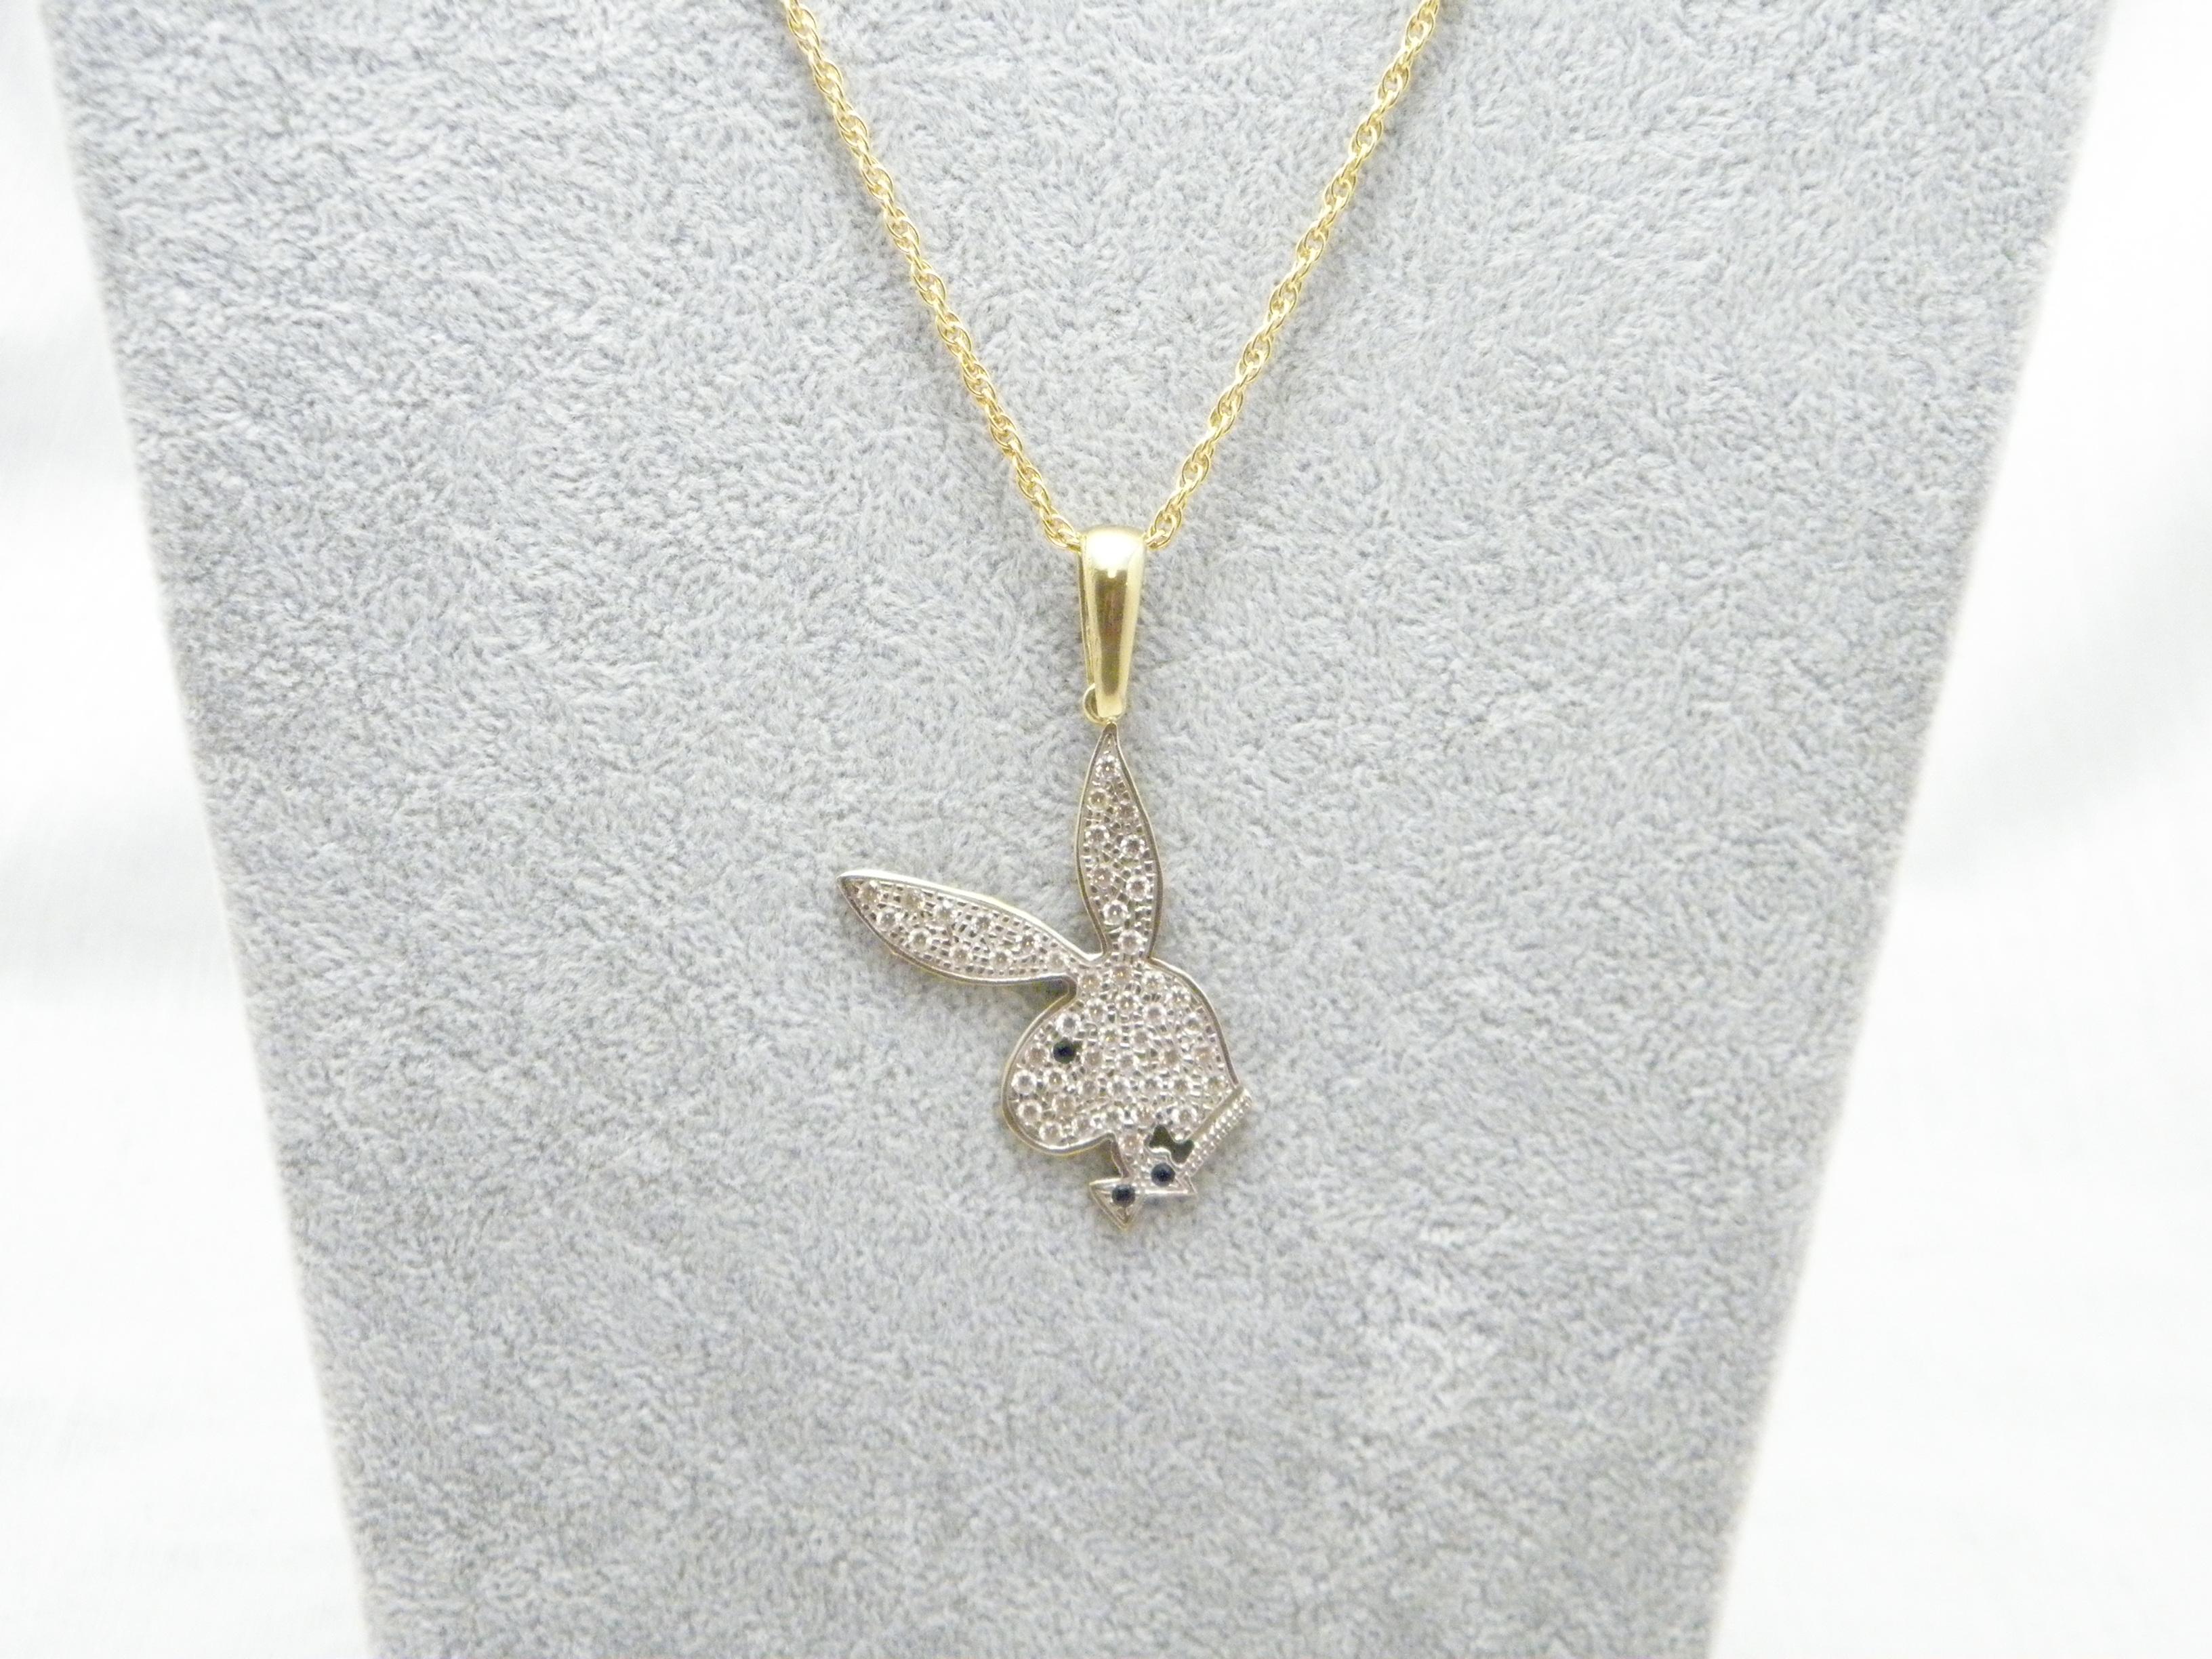 If you have landed on this page then you have an eye for beauty.

On offer is this gorgeous

9CT GOLD DETAILED HUGE GEM SET PLAYBOY BUNNY PENDANT NECKLACE

PENDANT DESCRIPTION
DETAILS
Material: Solid 9ct (375/000) yellow gold
Style: Classic Playboy